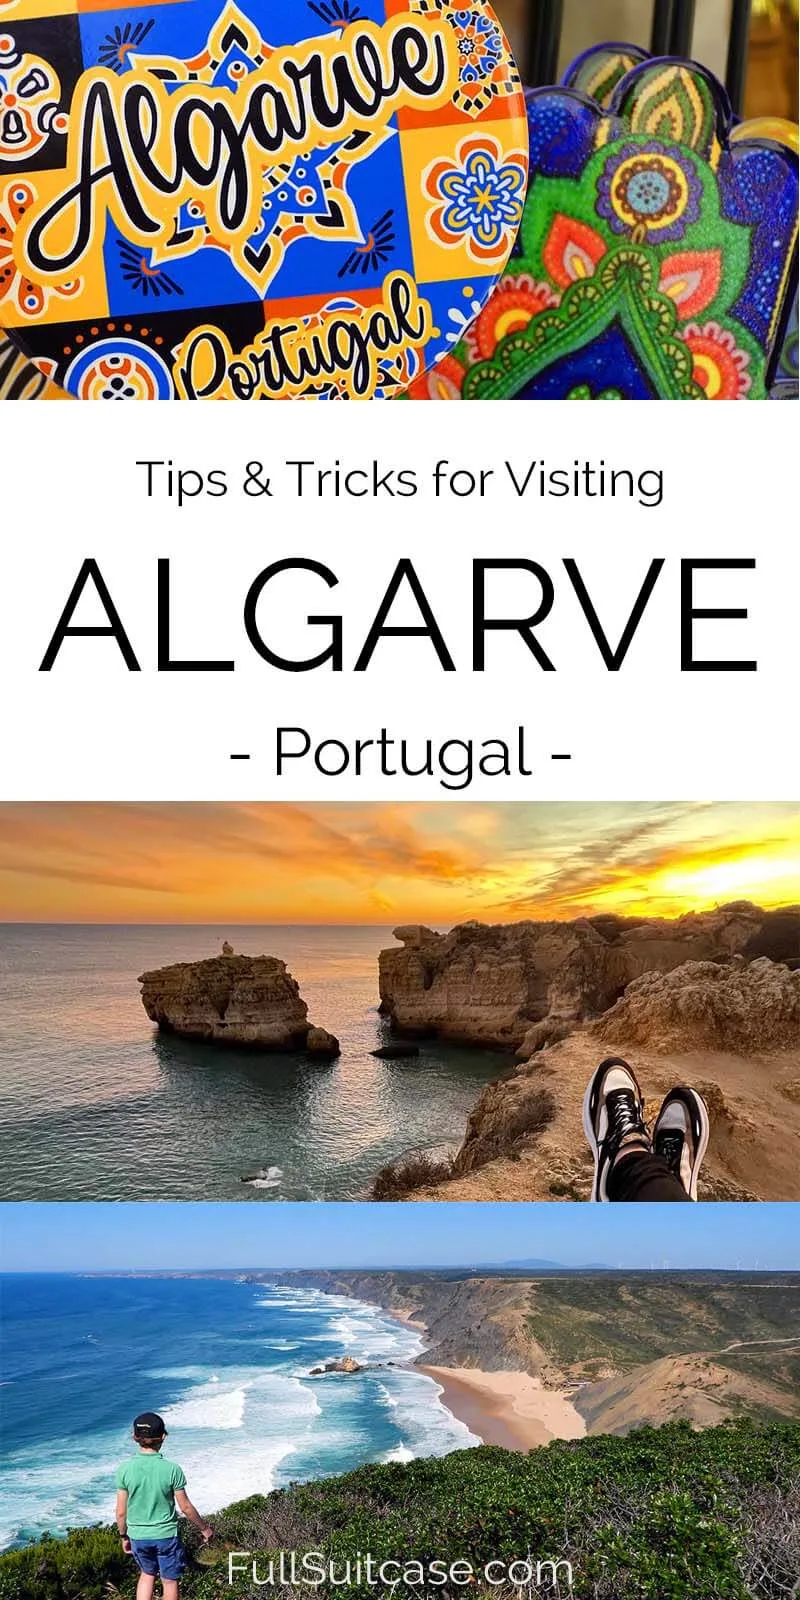 Visiting Algarve for the first time - tips and tricks